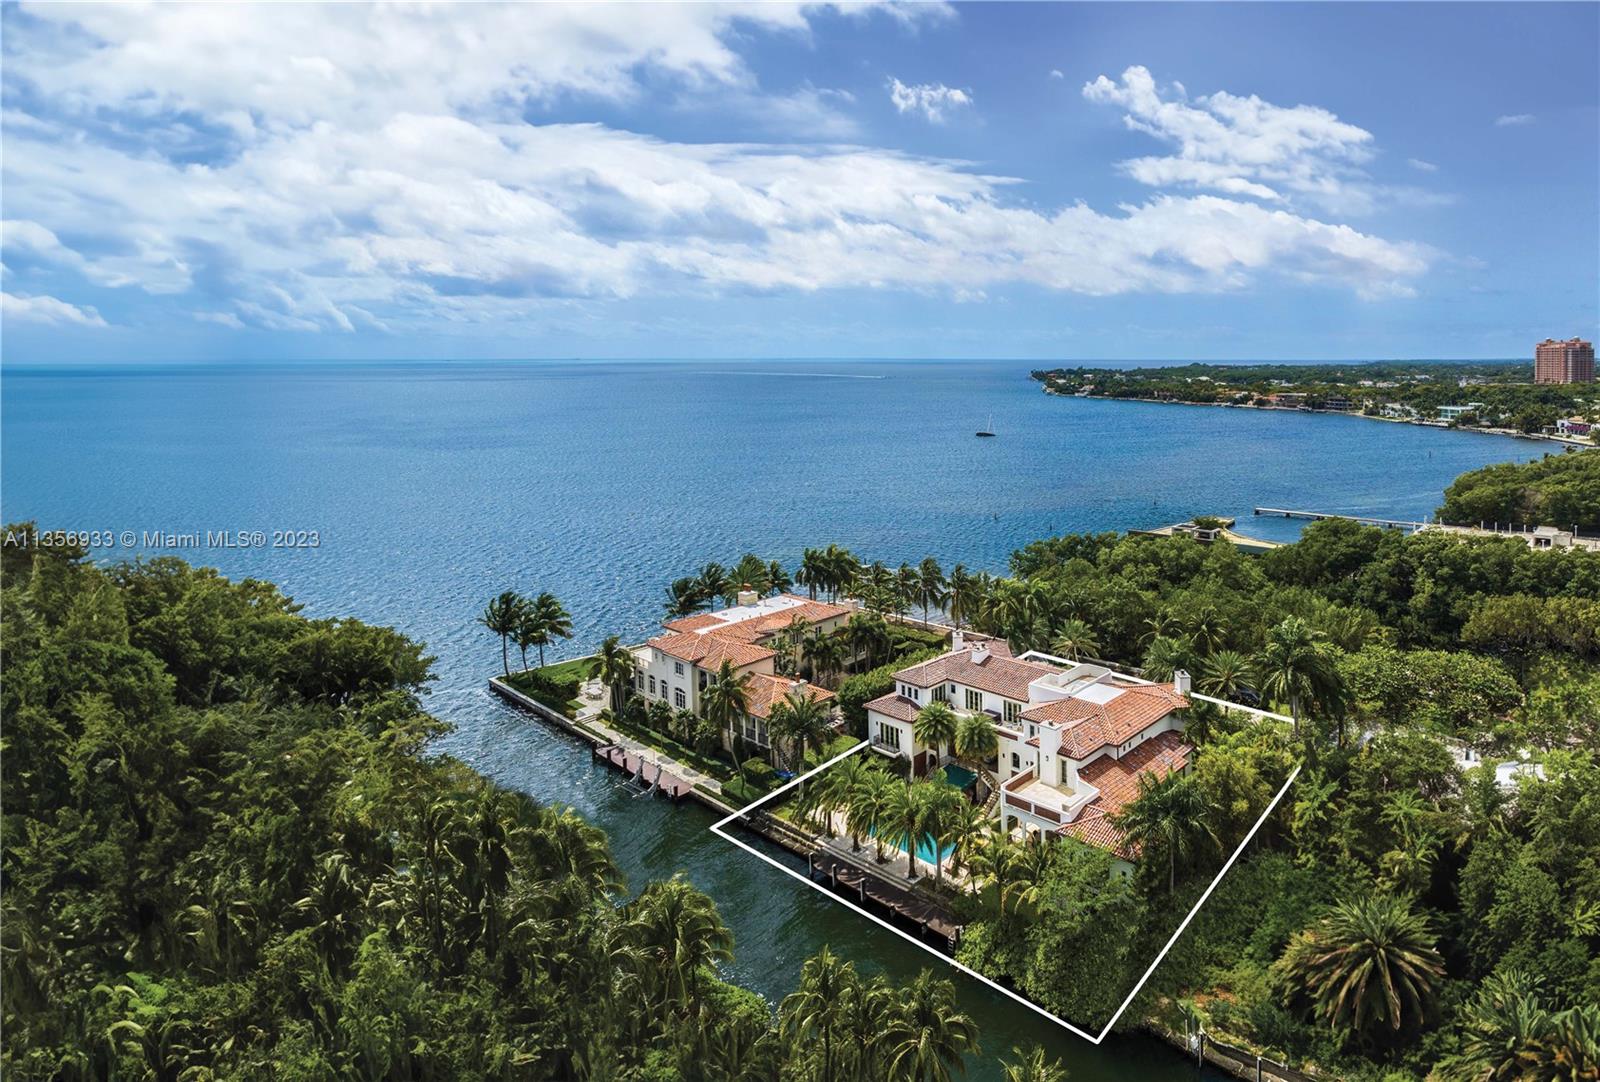 Located in the private guard-gated community “The Moorings”, this enchanting 17,873 total SF waterfront estate is in the heart of the most sought-after neighborhood in Coconut Grove. Every detail of the 7 BD/7+2 BA home was carefully selected and quality crafted. Multiple covered terraces provide a seamless blend of indoor and outdoor spaces with endless water views. A gourmet eat-in kitchen offers an exquisite, oversized island and top-of-the-line luxury appliances. The elegant primary suite features a sitting room, walk-in closets, and a spa-like bathroom retreat with a roman tub and fireplace. On 143 ft of waterfront, the home includes a pool, dock, direct access to Biscayne Bay, and a rooftop terrace with views of the Bay. In close proximity to the finest dining, shopping, and schools.